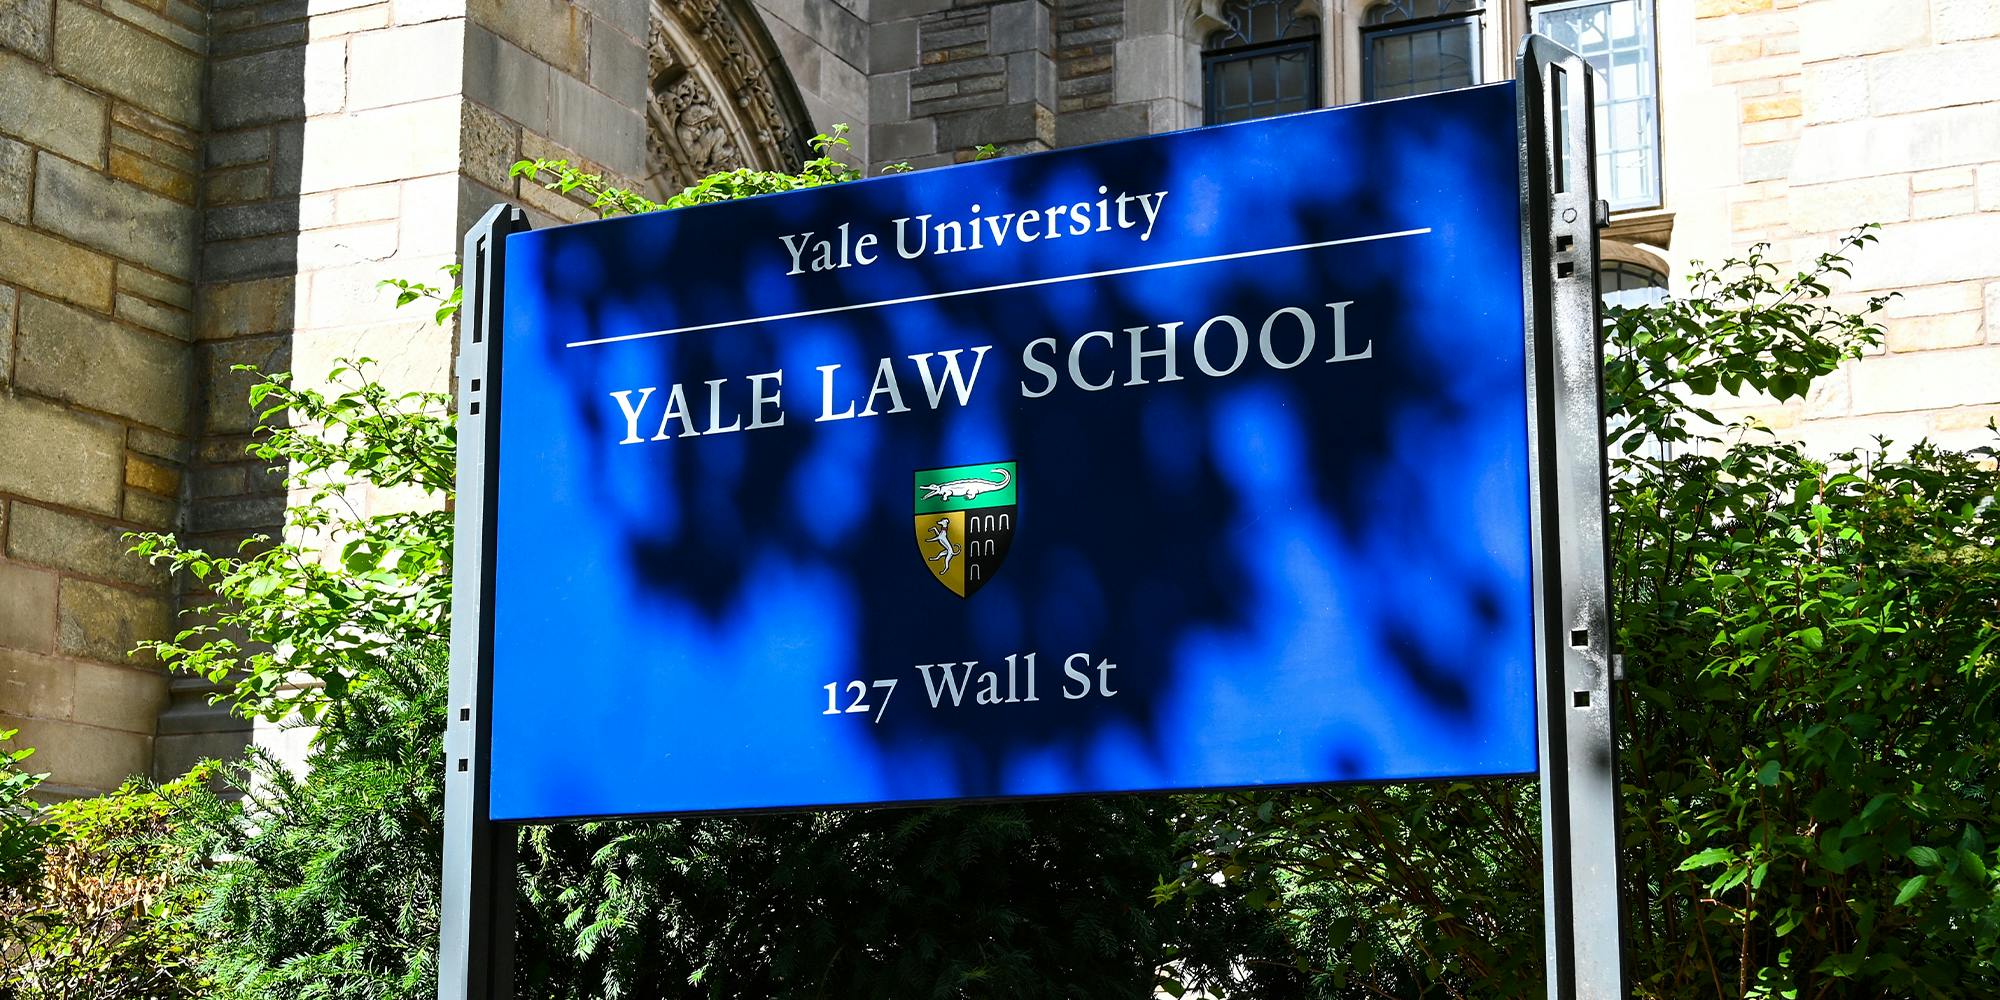 This Yale professor was sympathetic to Hamas. Now a petition with 35,000 signatures wants her fired